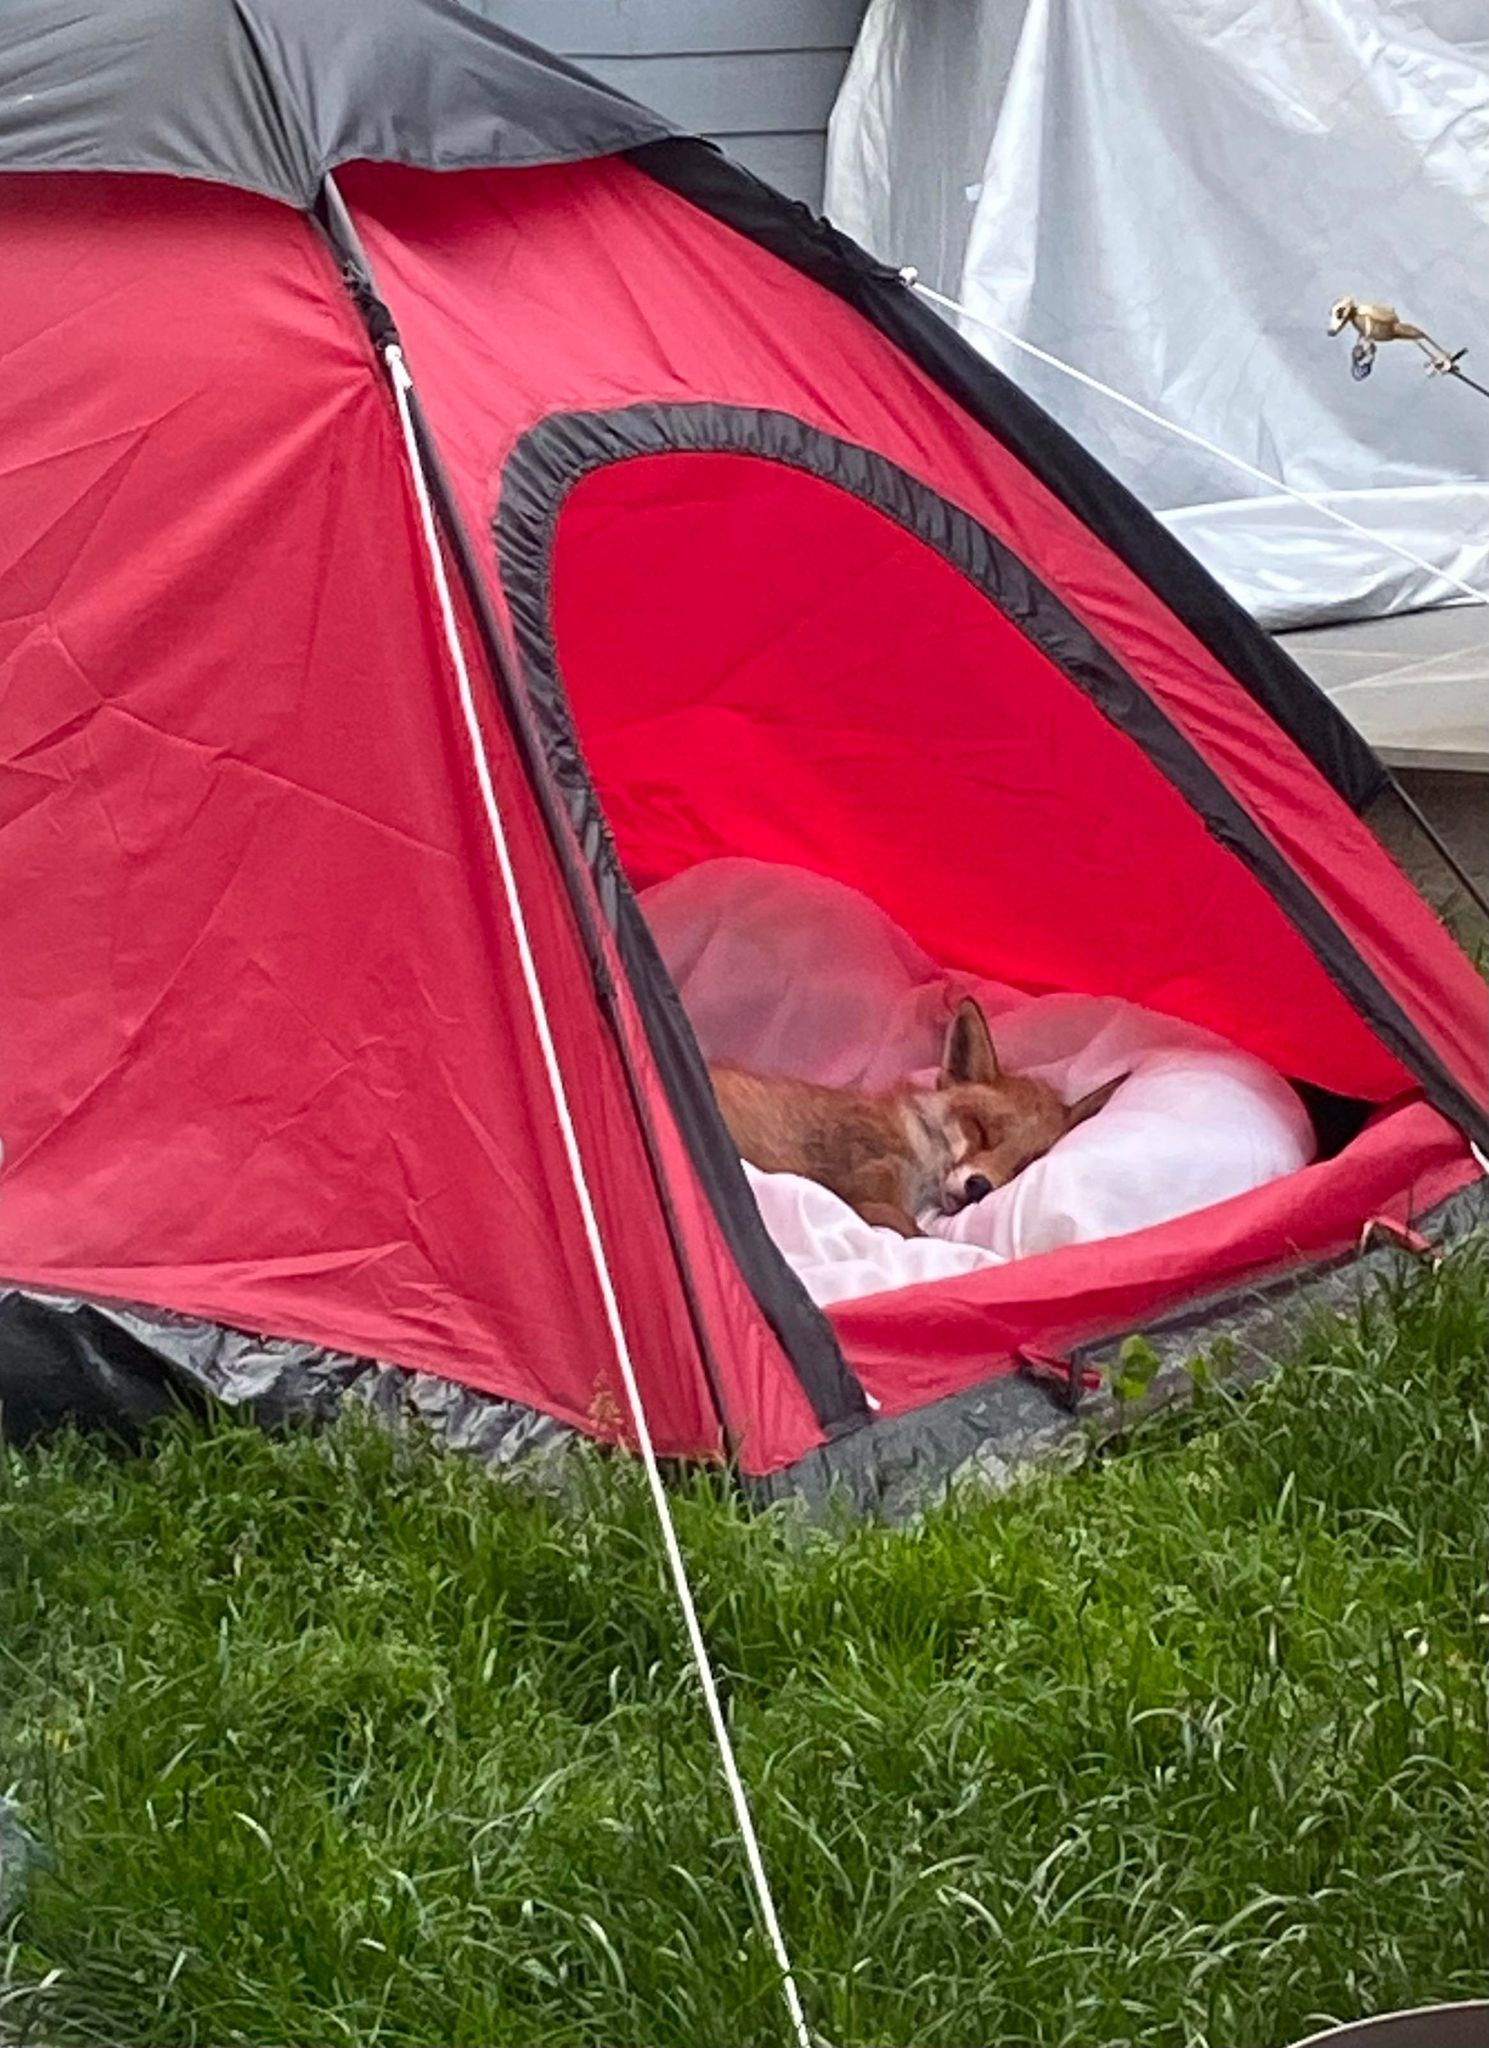 Injured fox sleeps in a red tent.